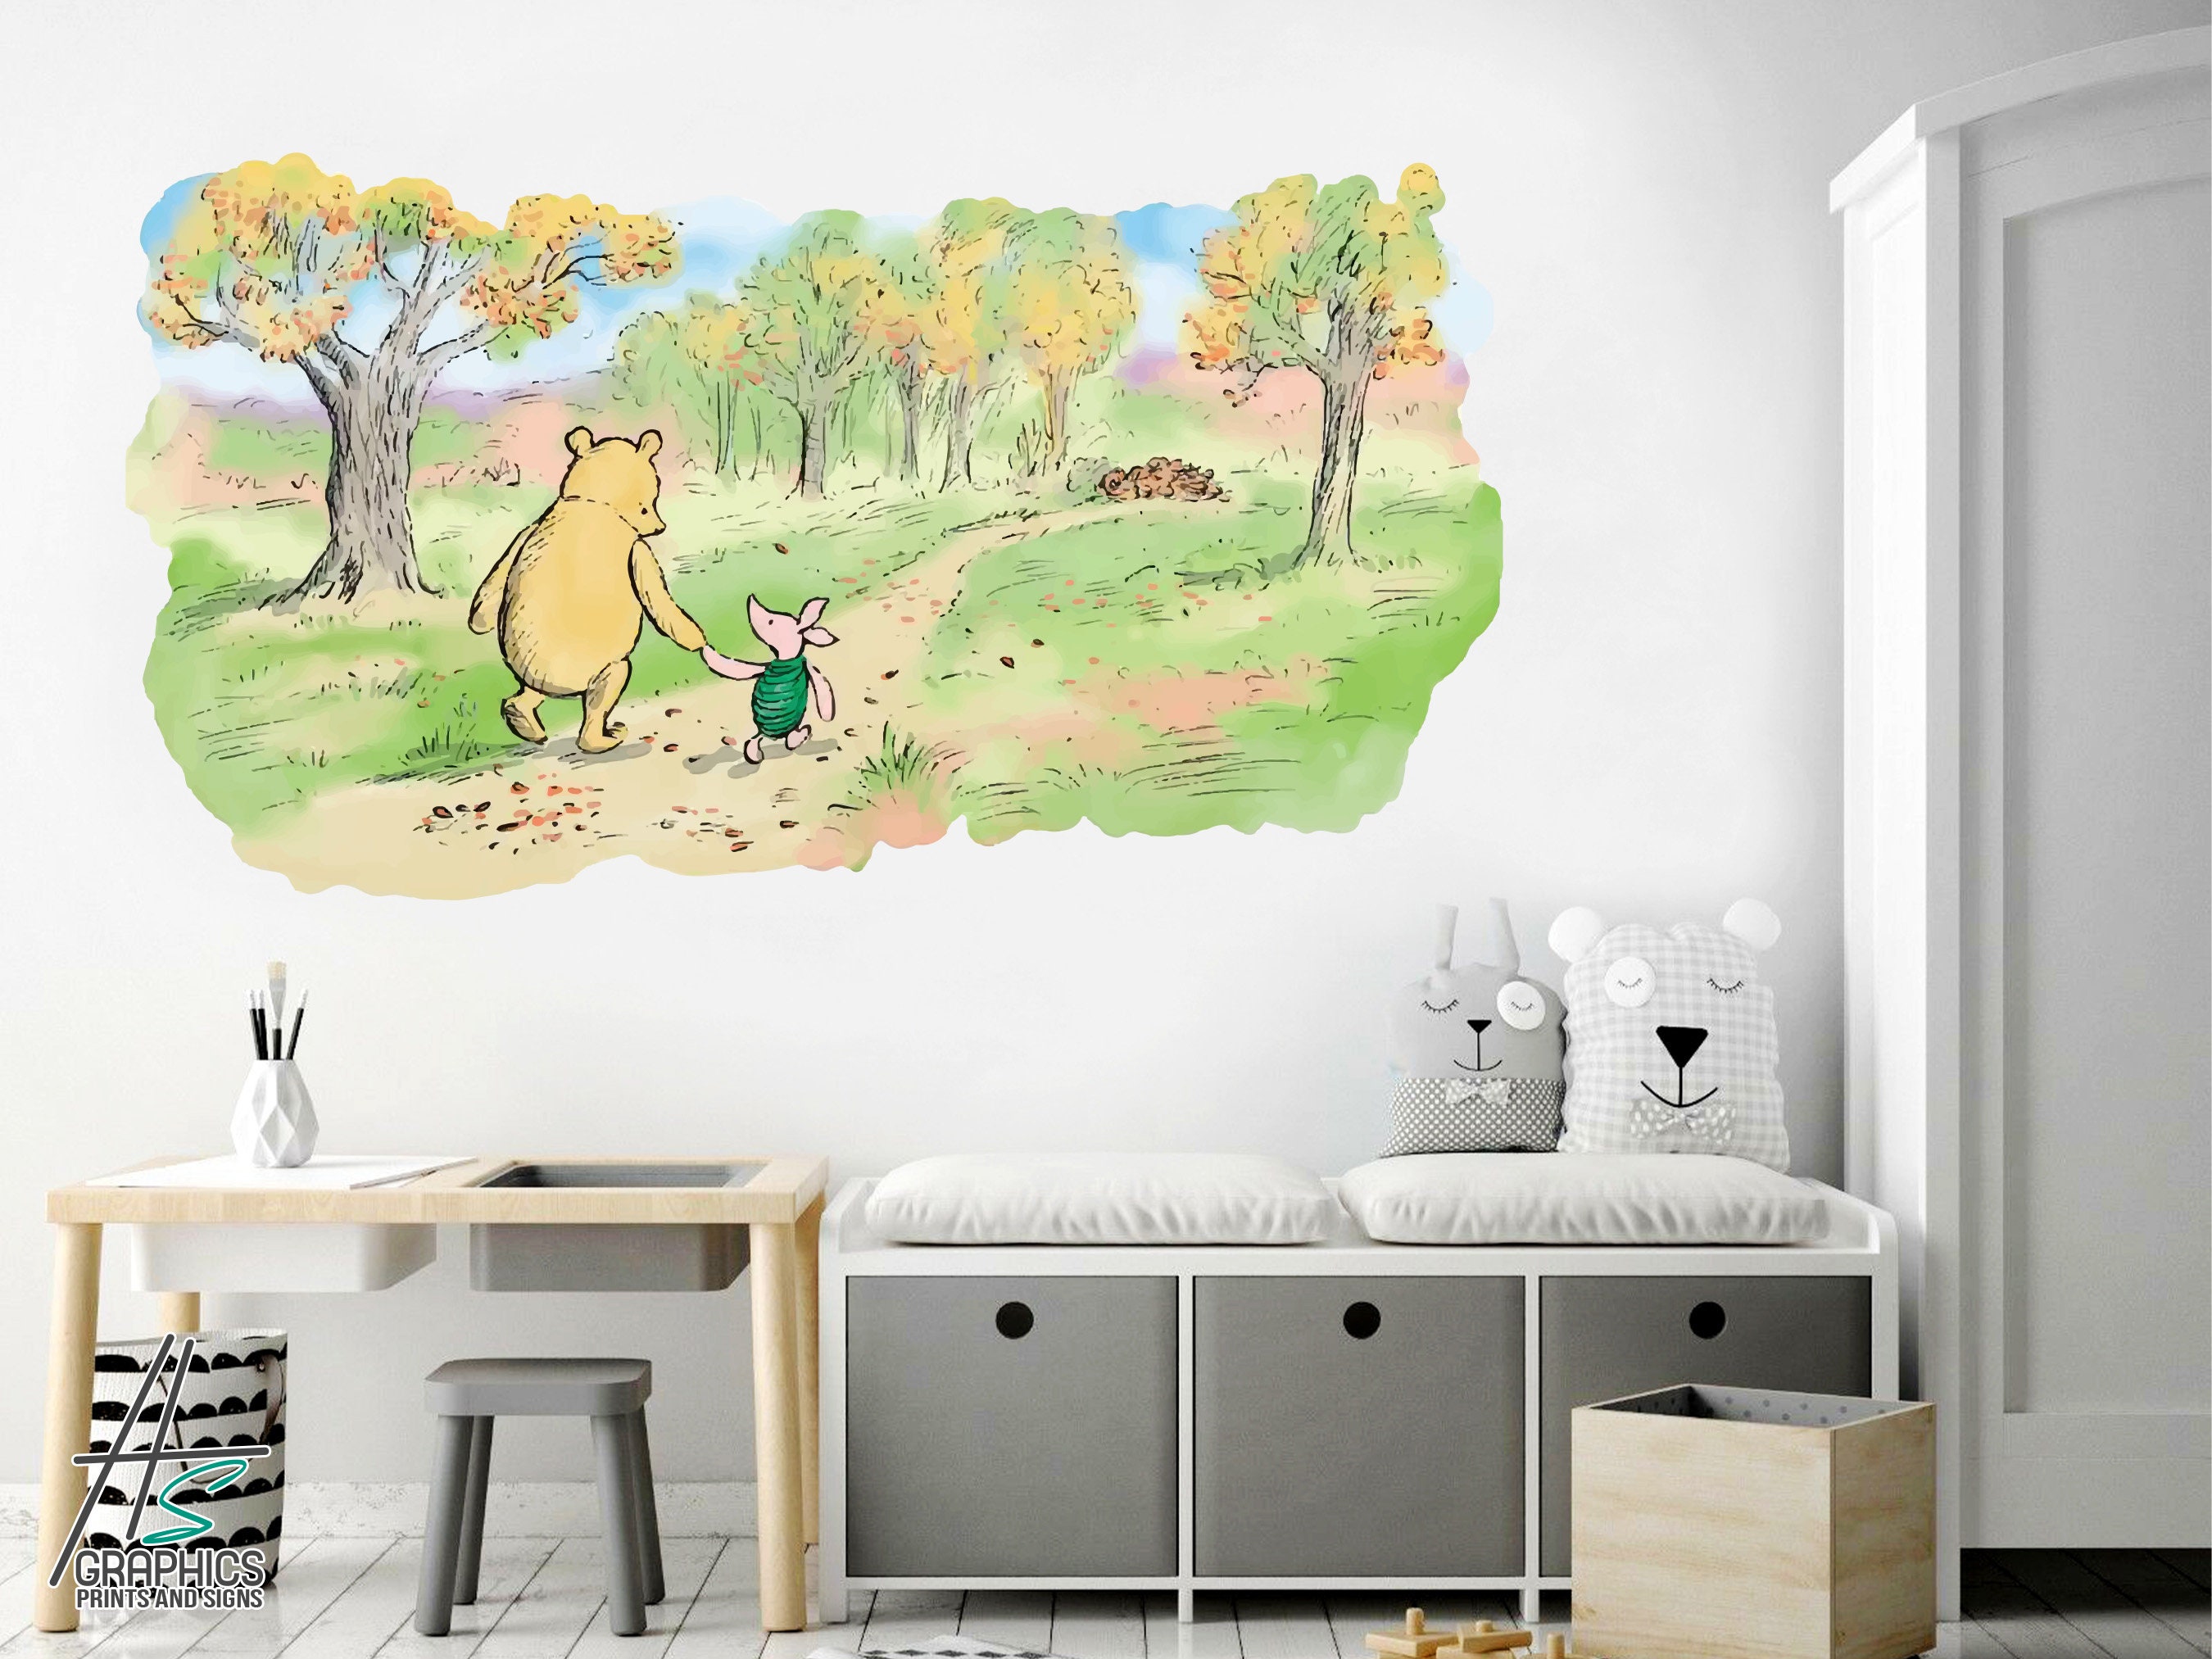 Quotes From Winnie The Pooh Stickers - By Artollo